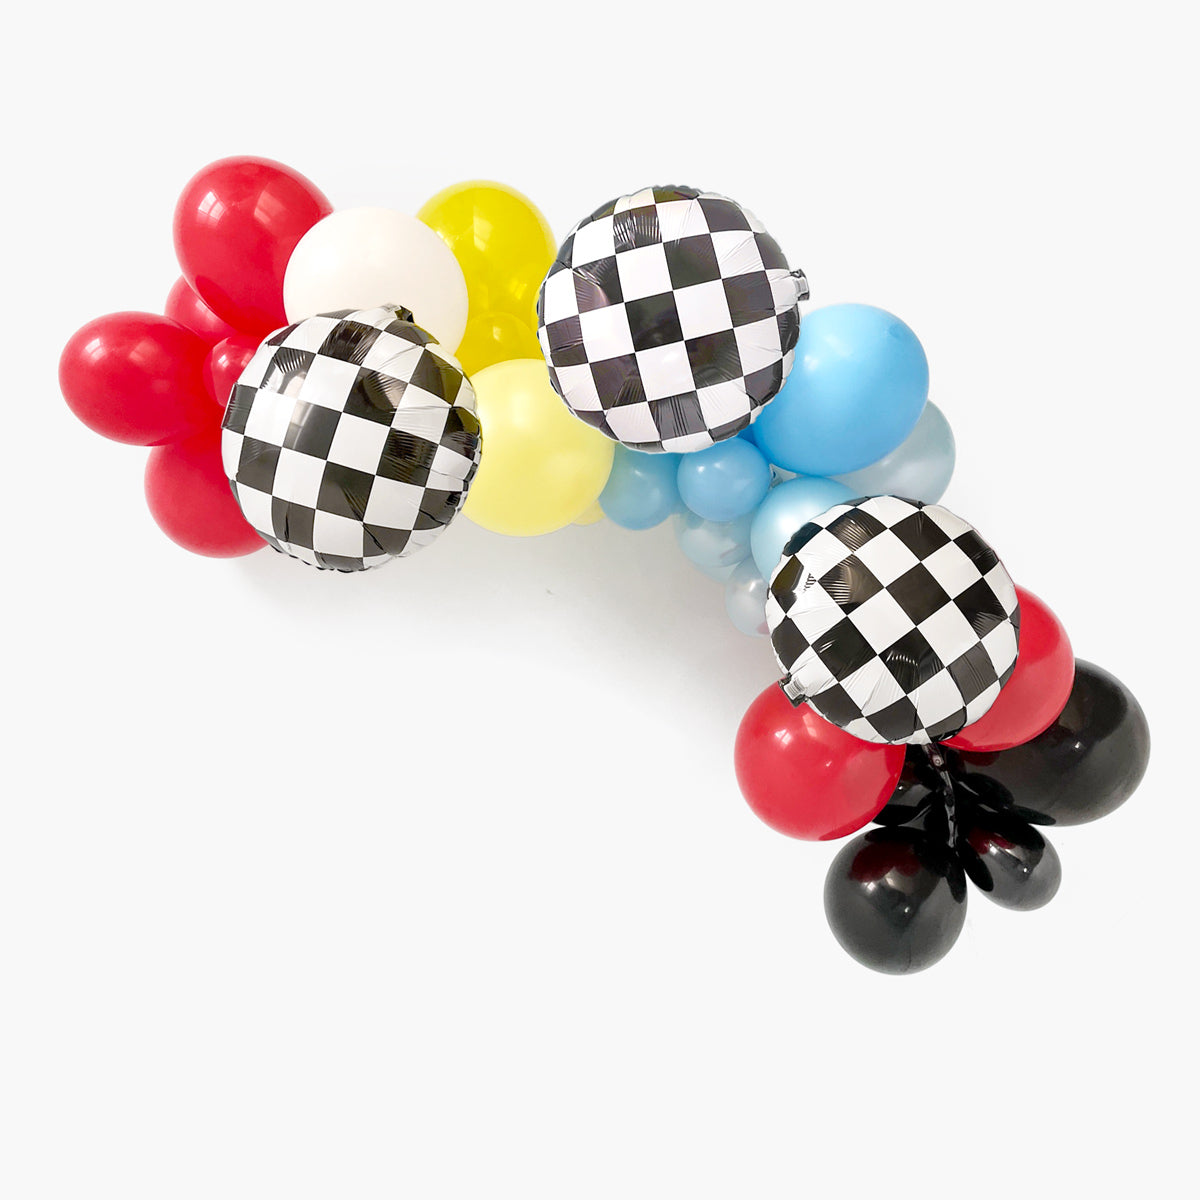 Race Car Party Balloon Garland Kit - Boy Race Car Fast Speed Fast One Two Fast Birthday Party Balloon Backdrop Decorations